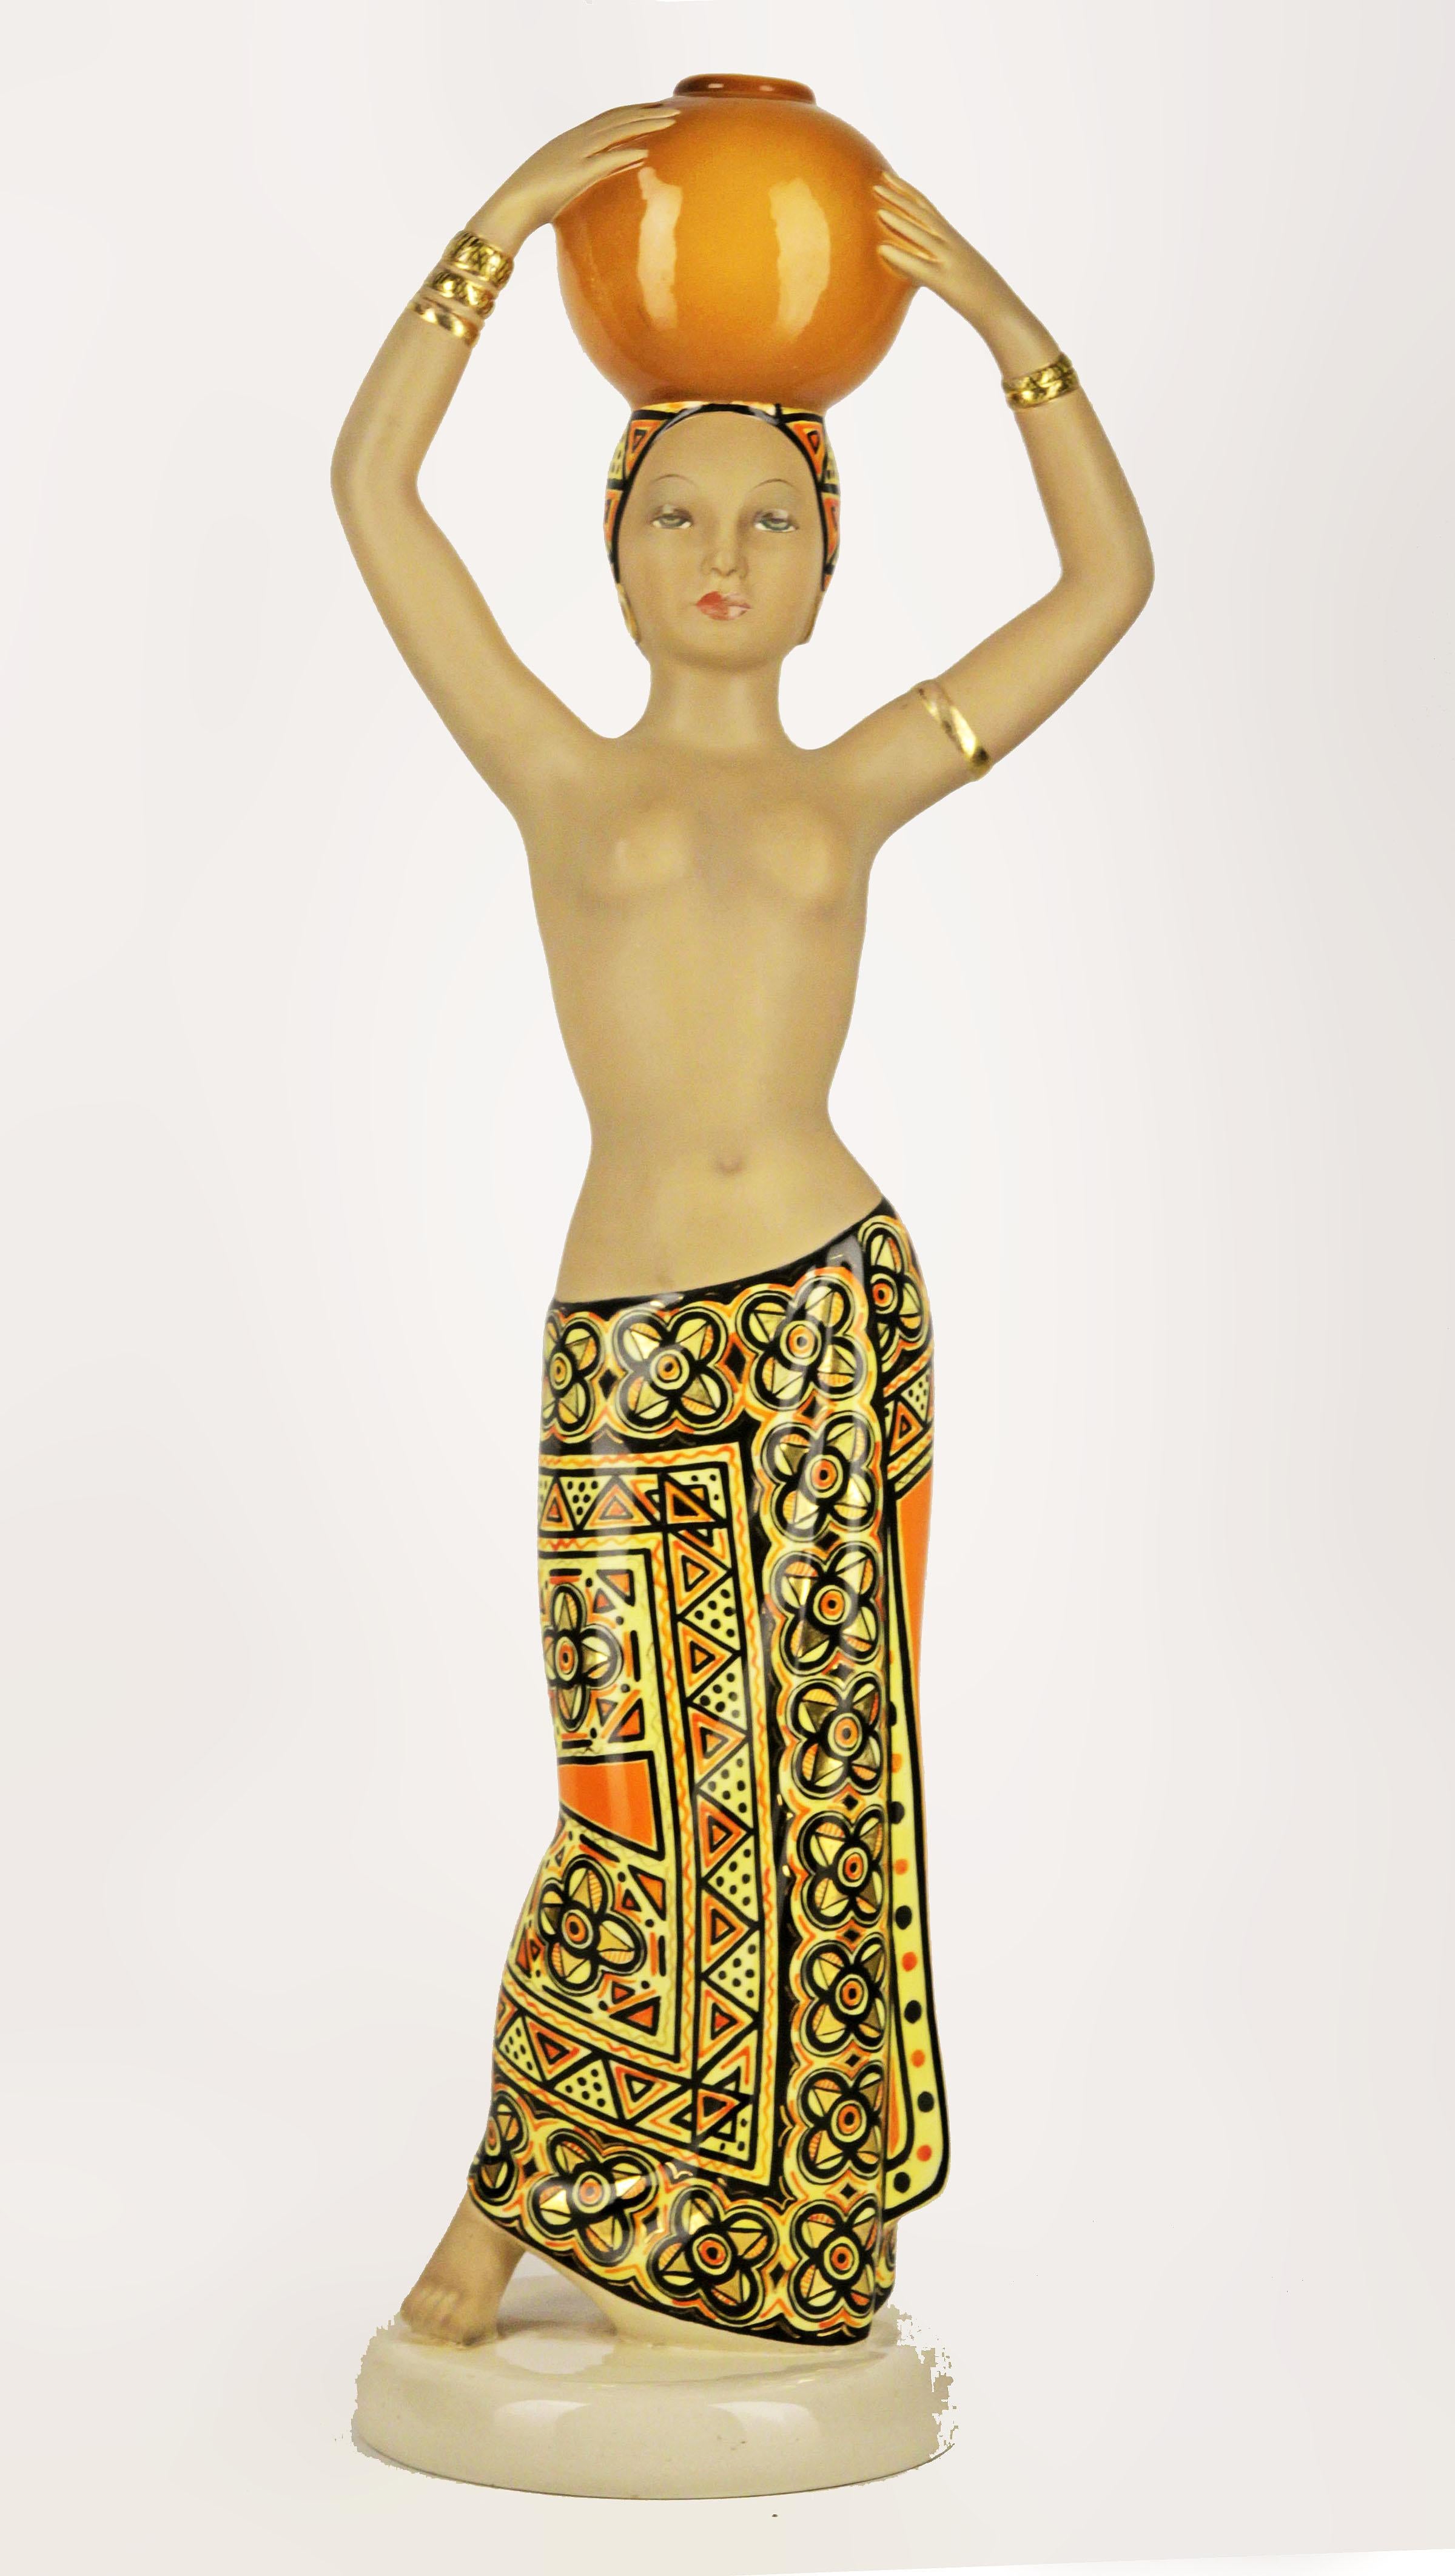 Mid-20th century Torino ceramic semi-nude woman sculpture 'Portatrice Africana' by C.I.A. Manna

By: C.I.A. Manna
Material: ceramic, paint
Technique: gilt, glazed, hand-crafted, molded, painted, pressed, unglazed
Dimensions: 6 in x 22 in
Date: